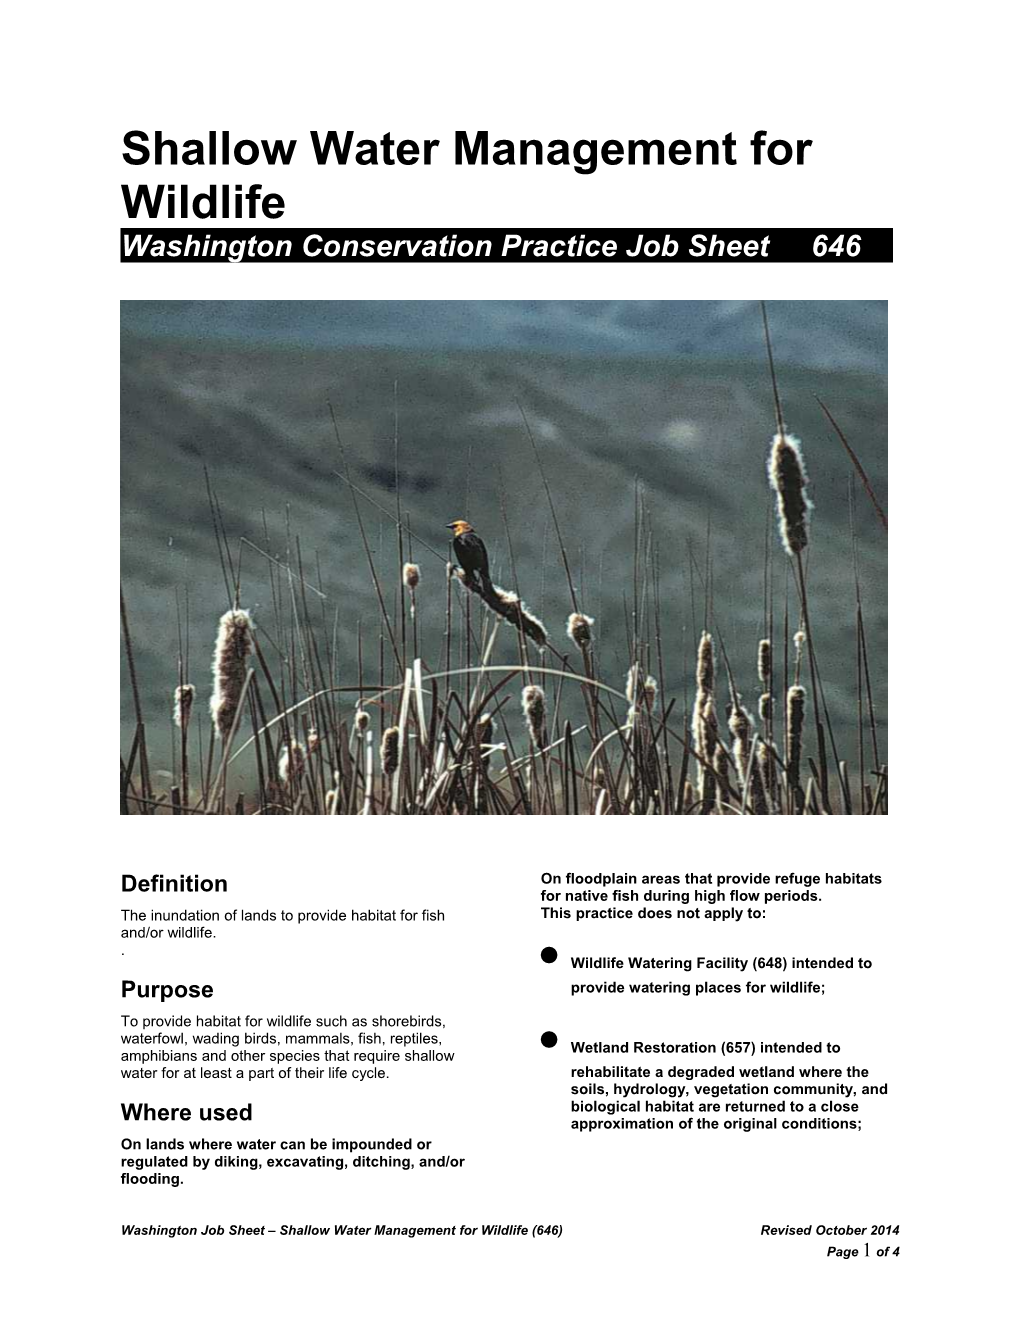 Shallow Water Management for Wildlife s1